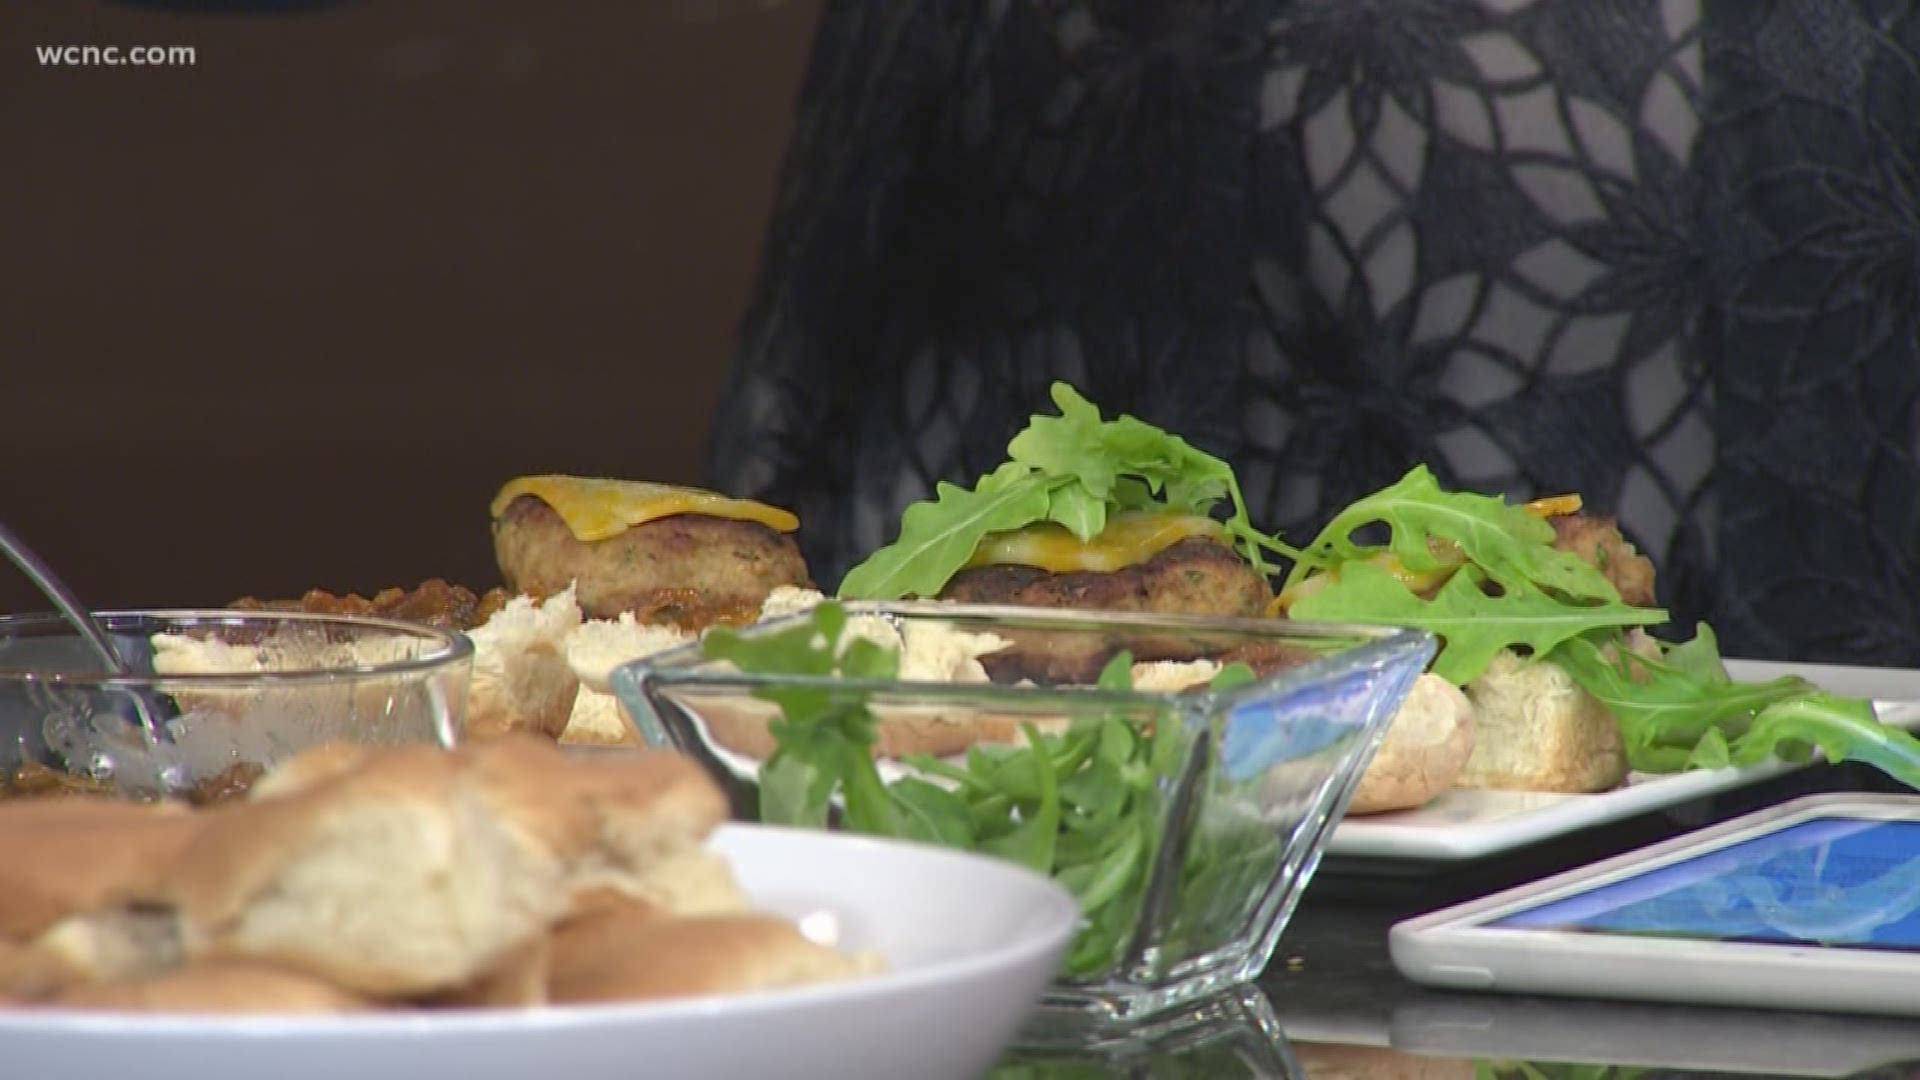 Chef William Williams shows us how to make spicy sweet sliders your next party guests will love.